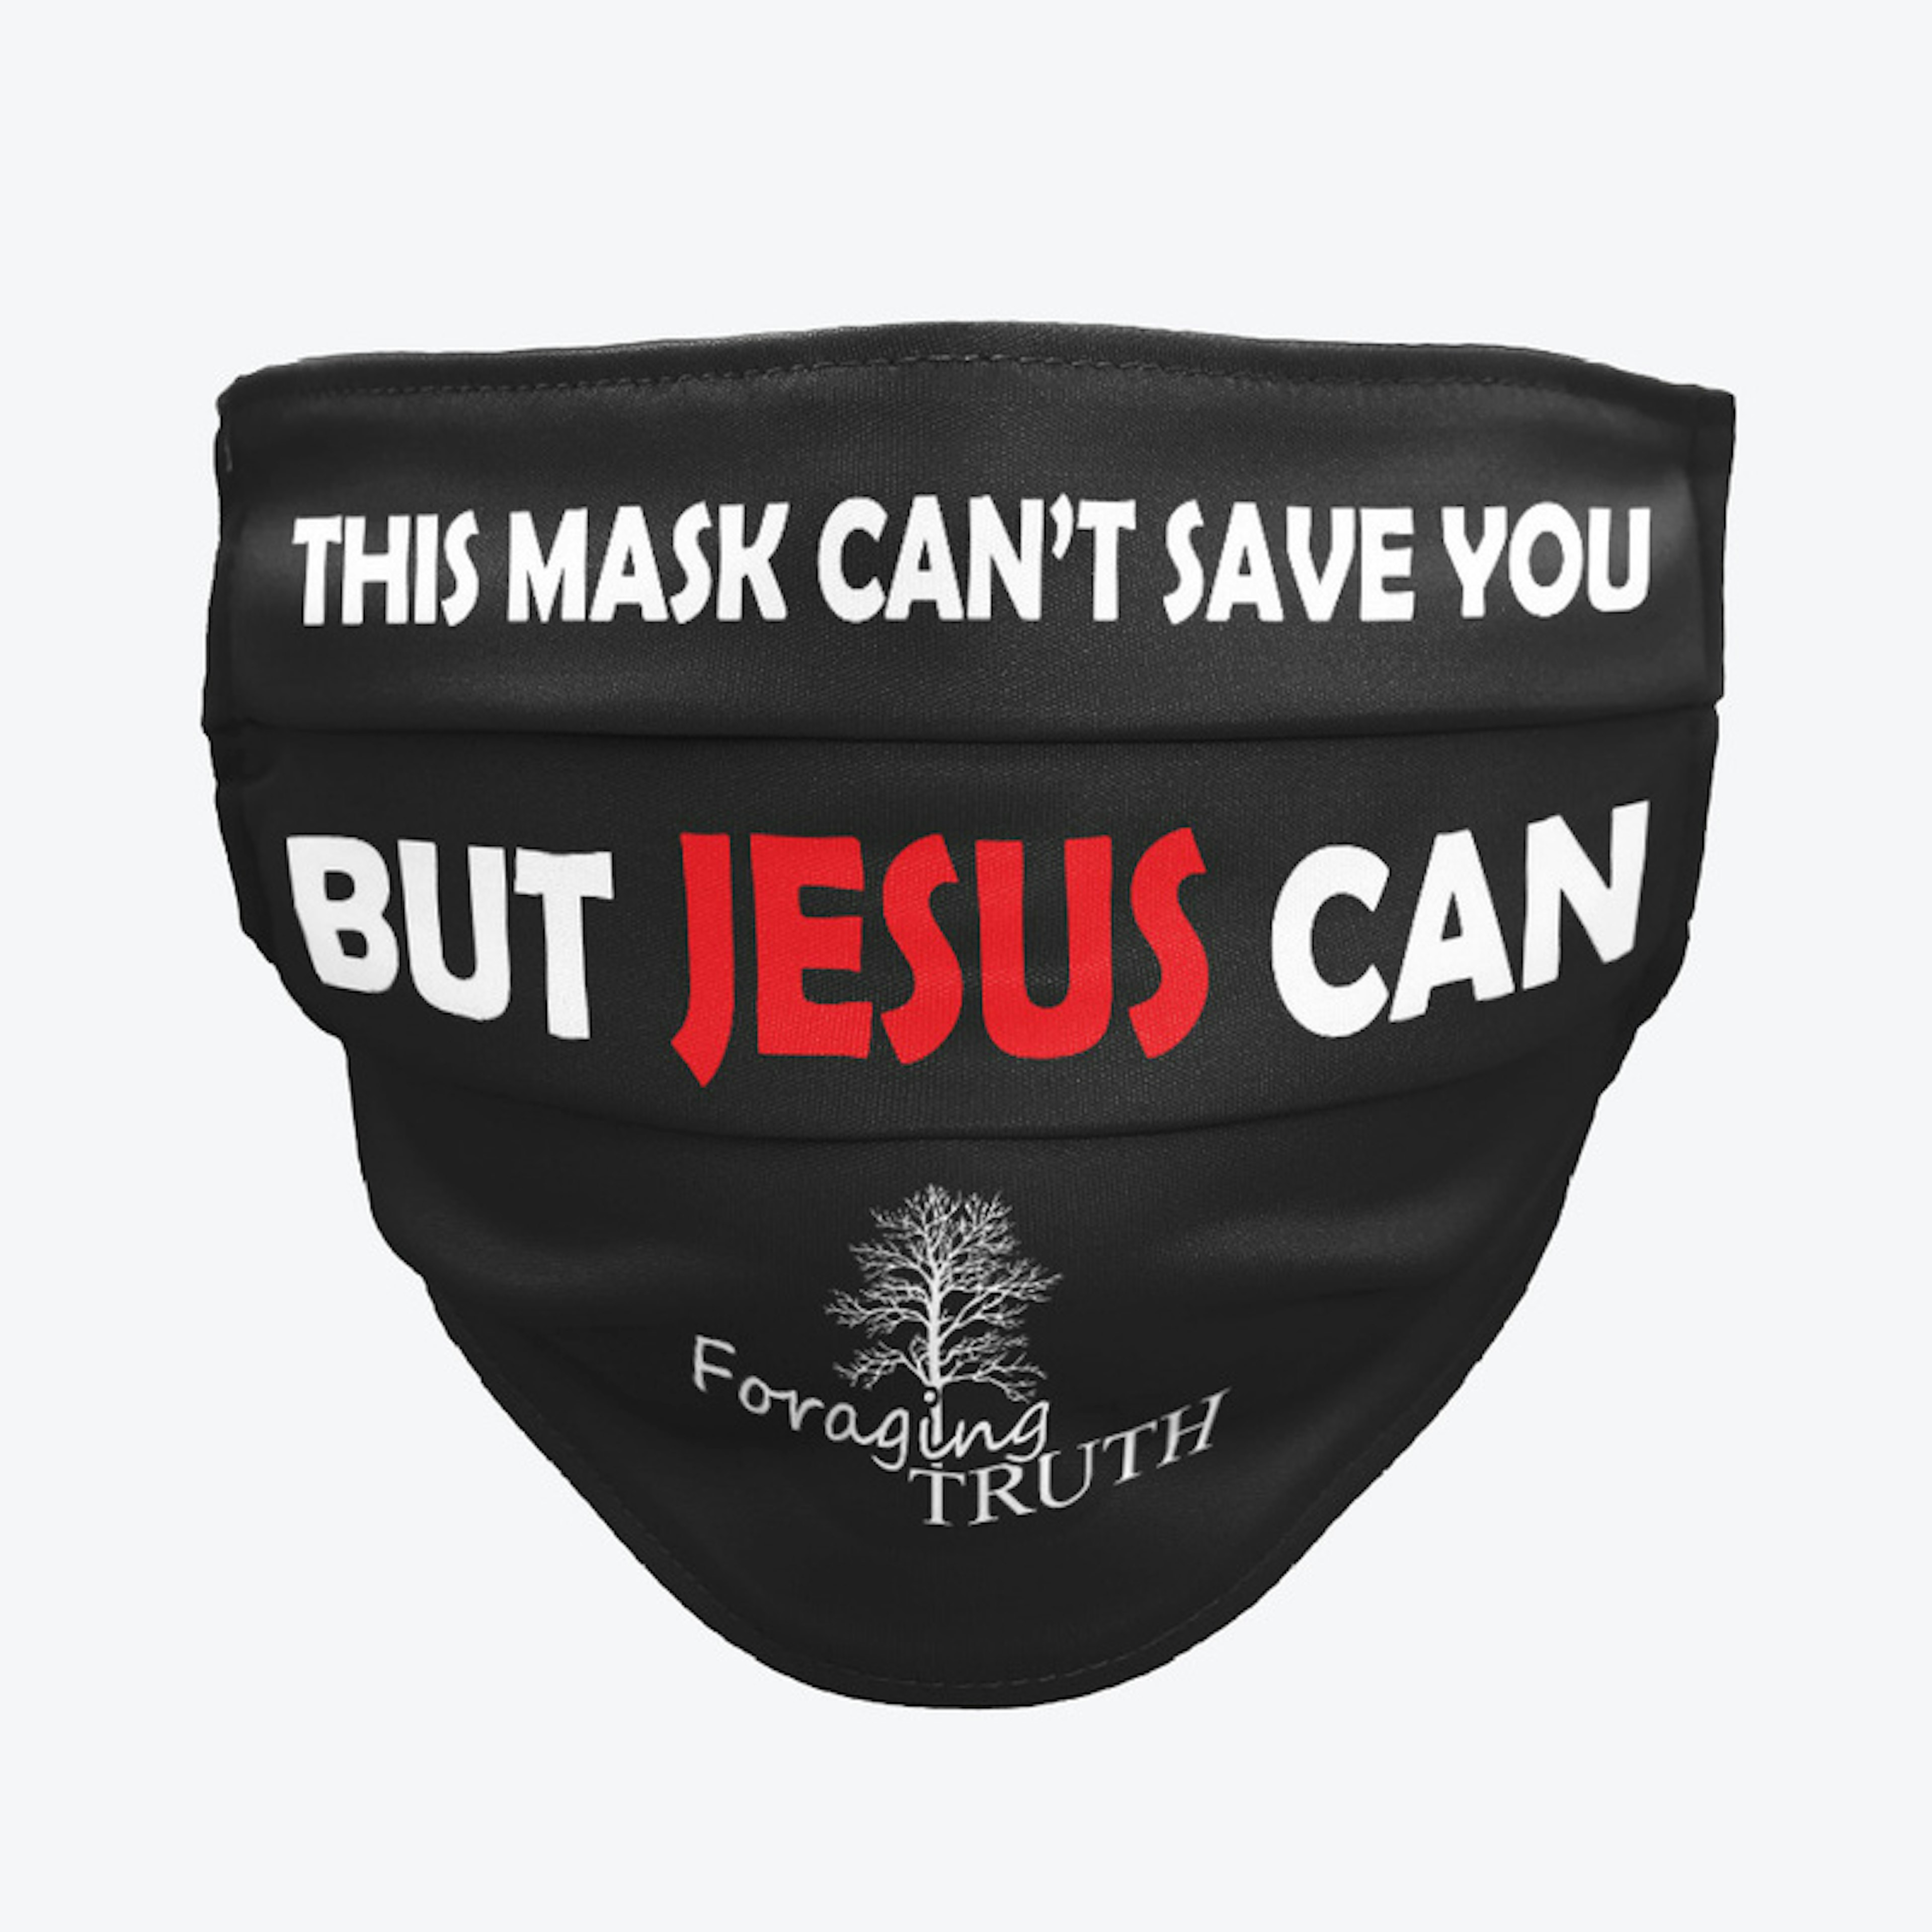 This mask can't save you...but Jesus can